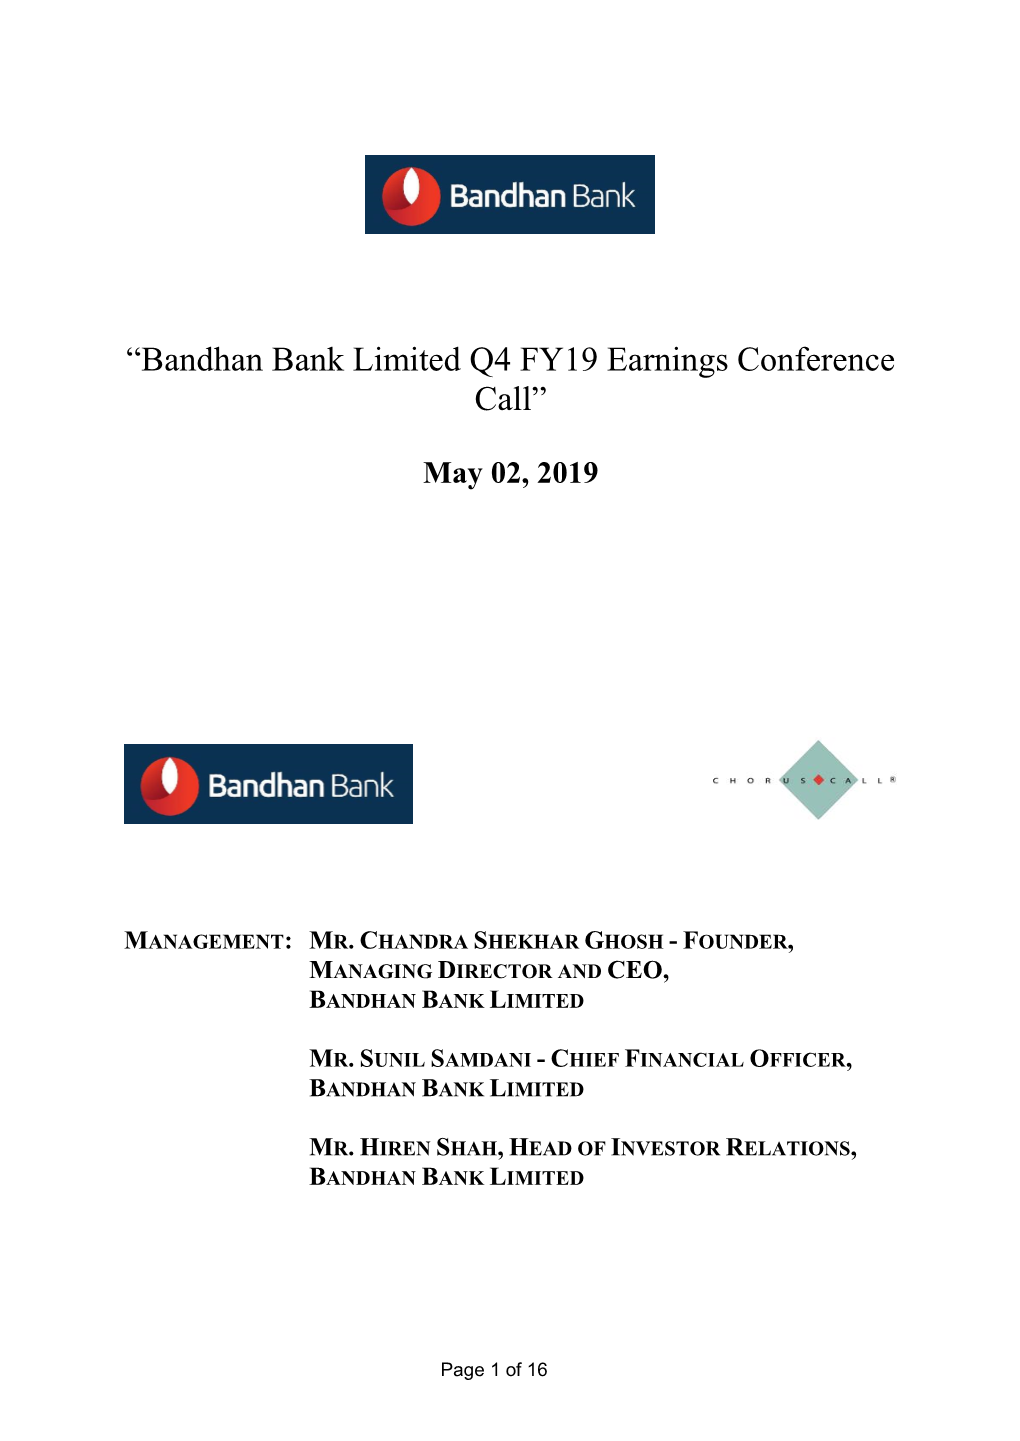 “Bandhan Bank Limited Q4 FY19 Earnings Conference Call”